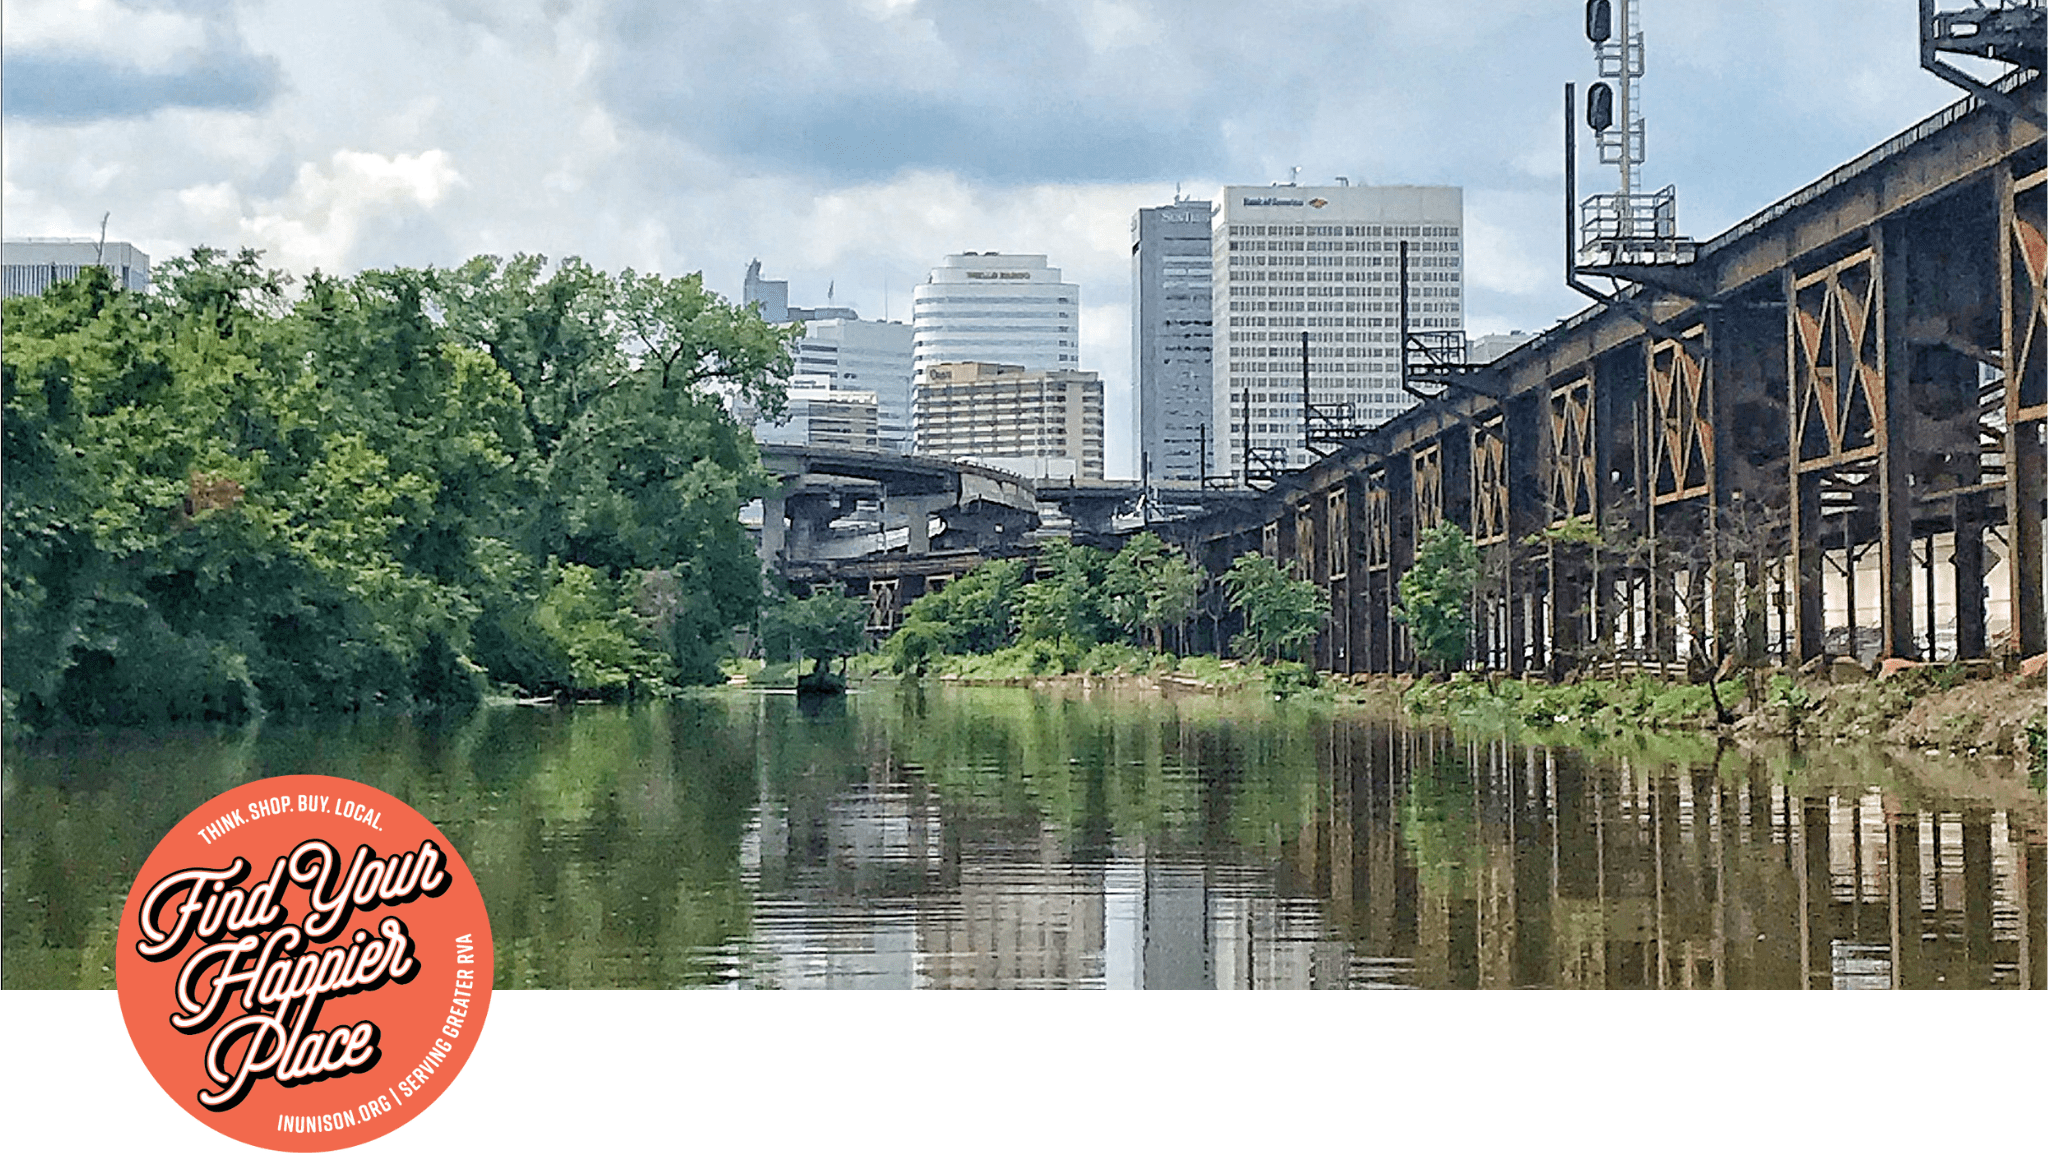 A view of the Richmond city skyline from the historic canal